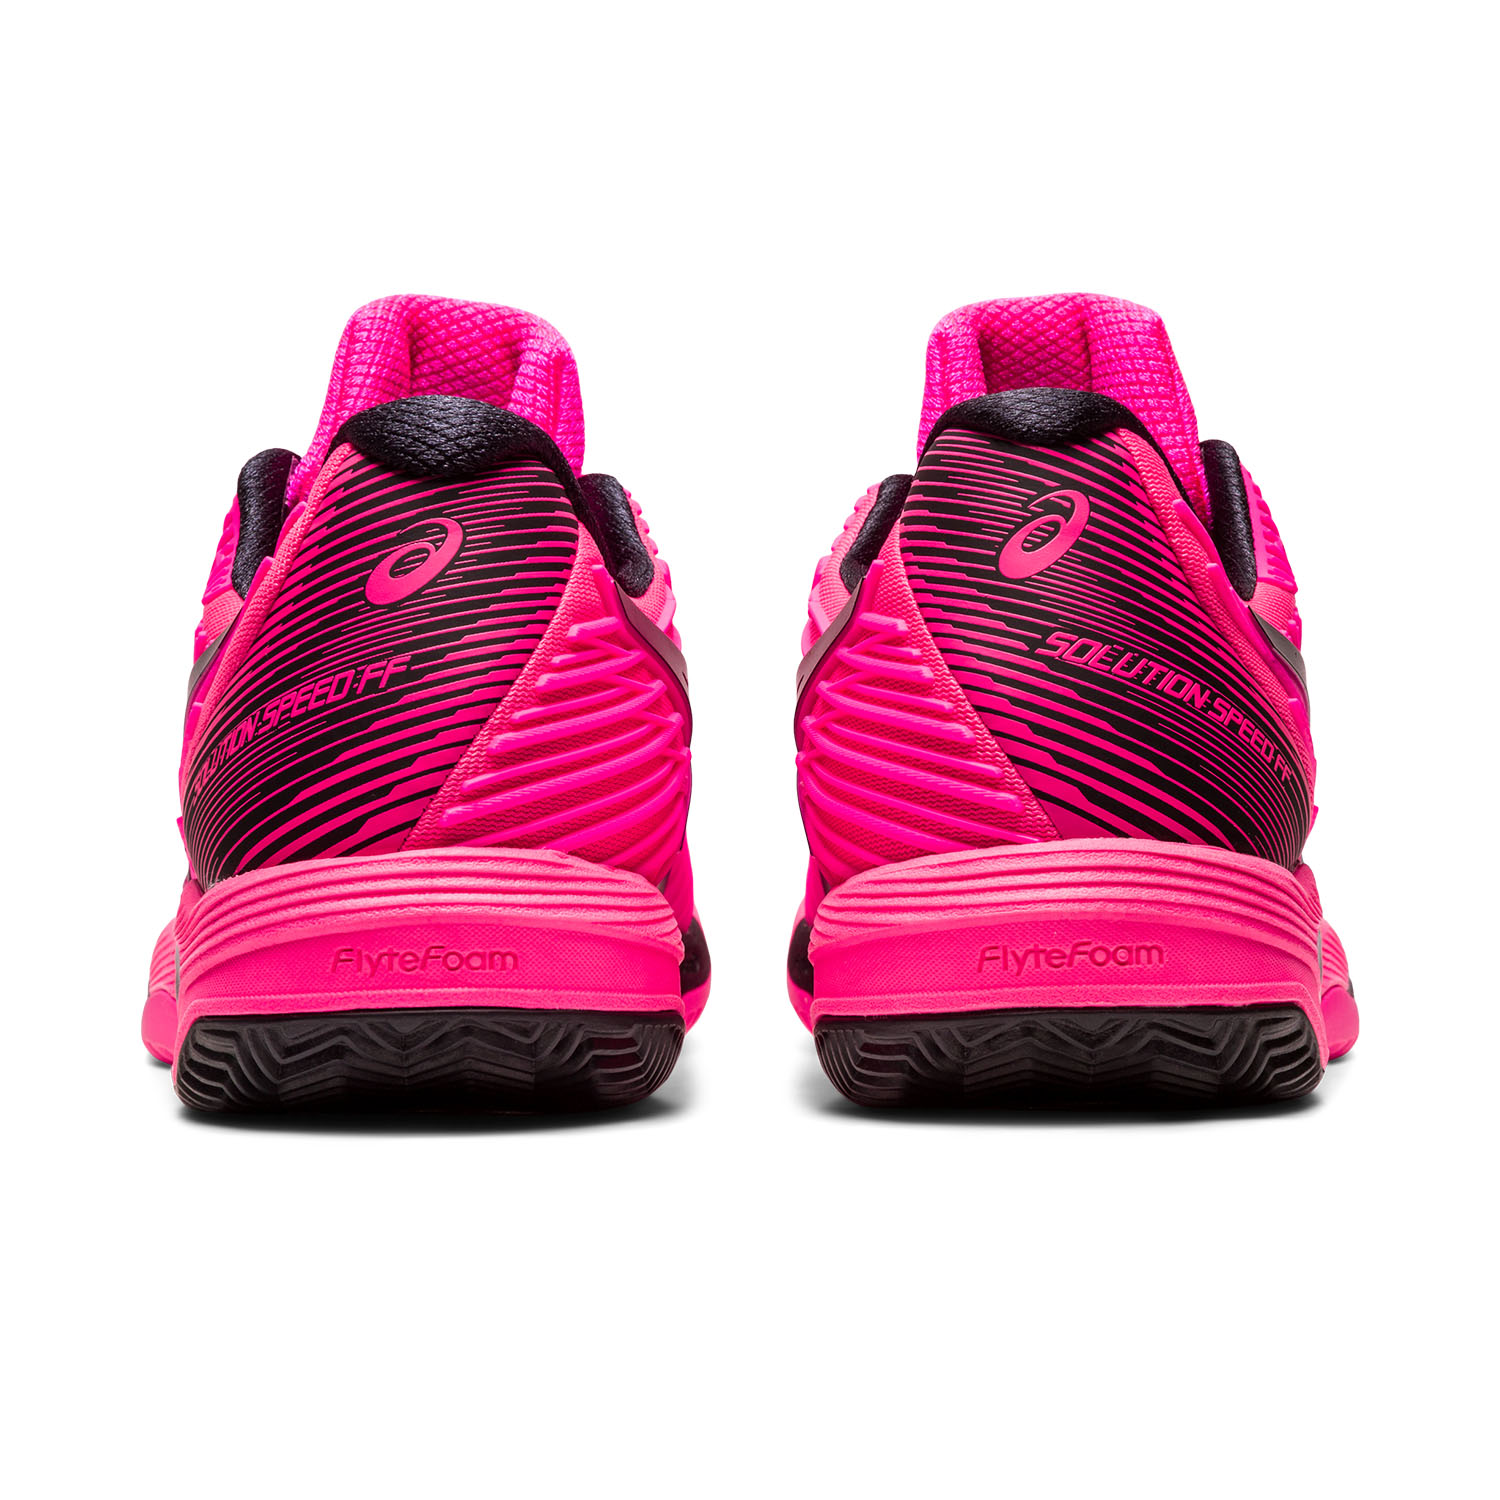 Asics Solution Speed FF 2 Clay - Hot Pink/Black